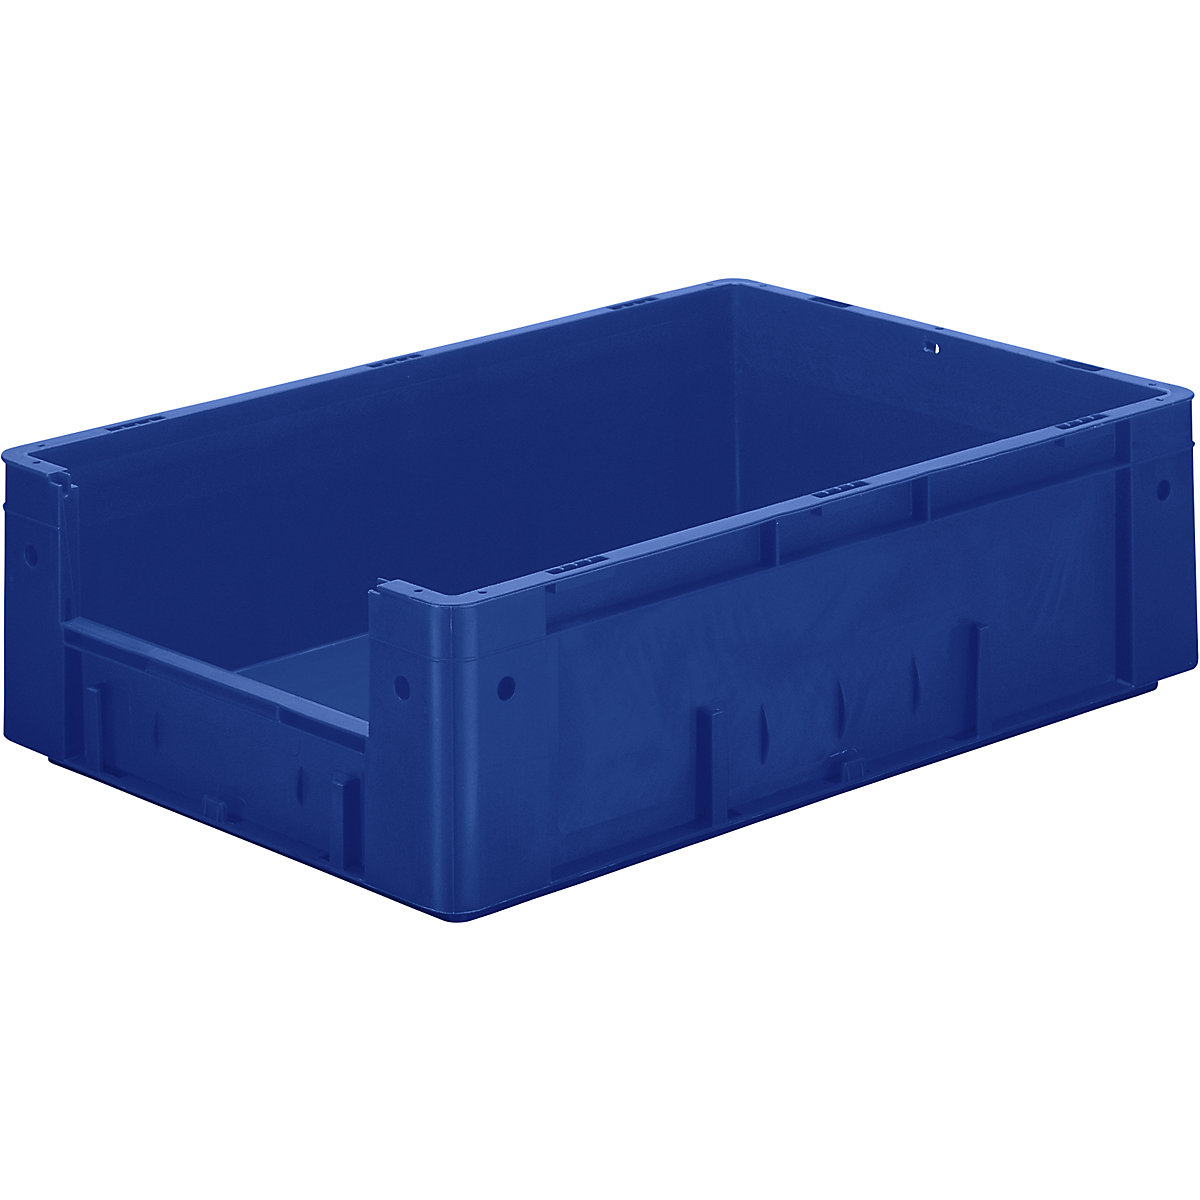 Euro stacking container, capacity 31 l, LxWxH 600 x 400 x 175 mm, pack of 2, blue-7